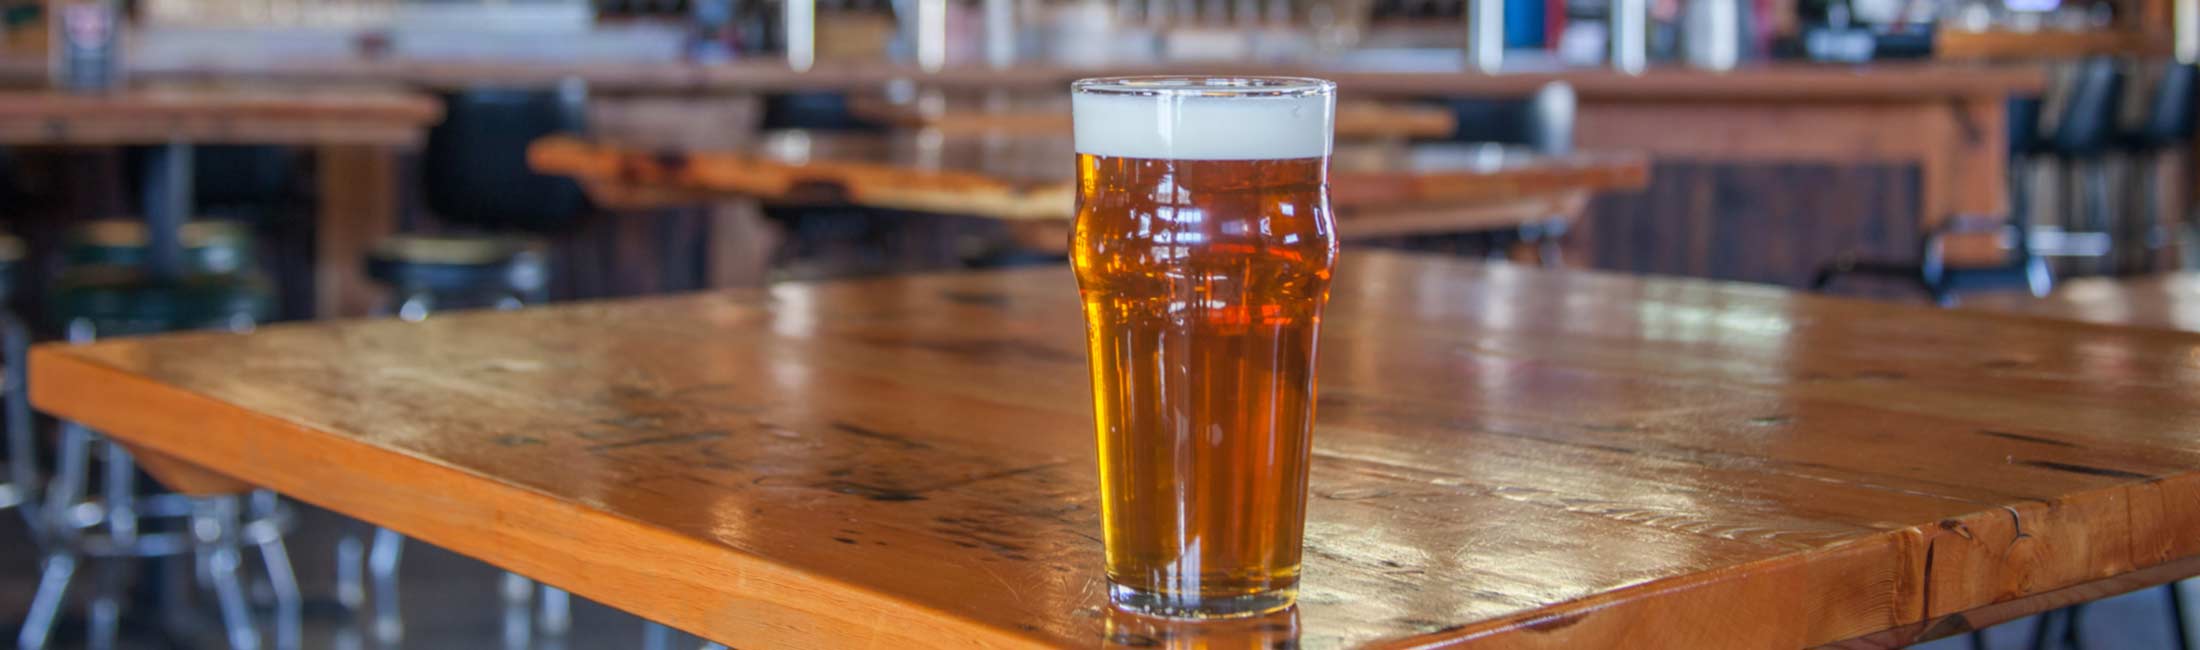 Missoula Named as one of the Best Cities for Beer Drinkers by Smart Asset